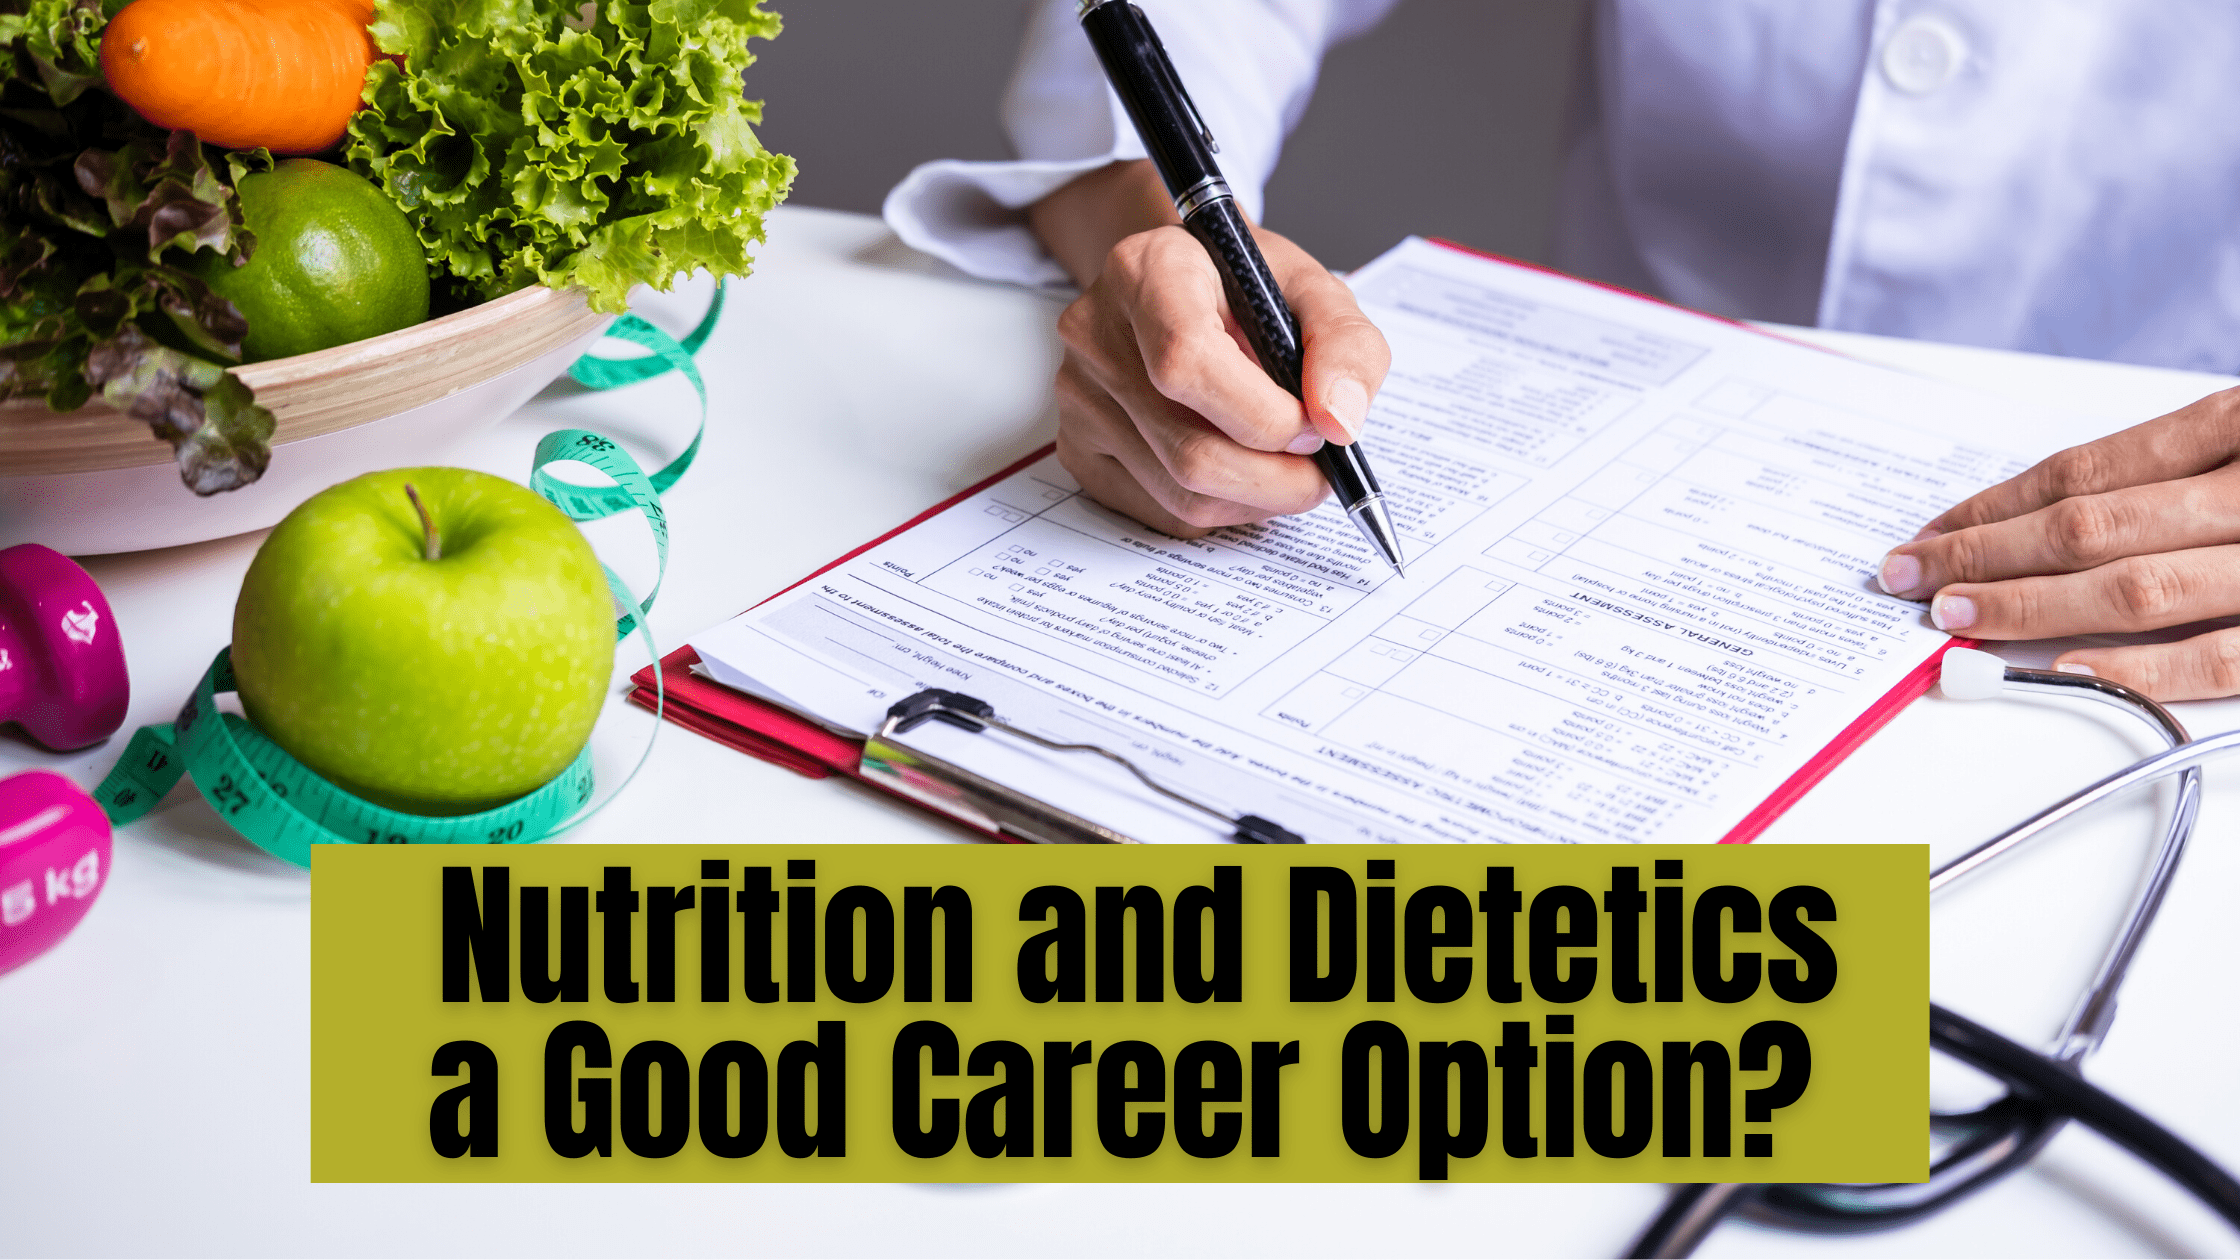 Is Nutrition and Dietetics a Good Career Option?